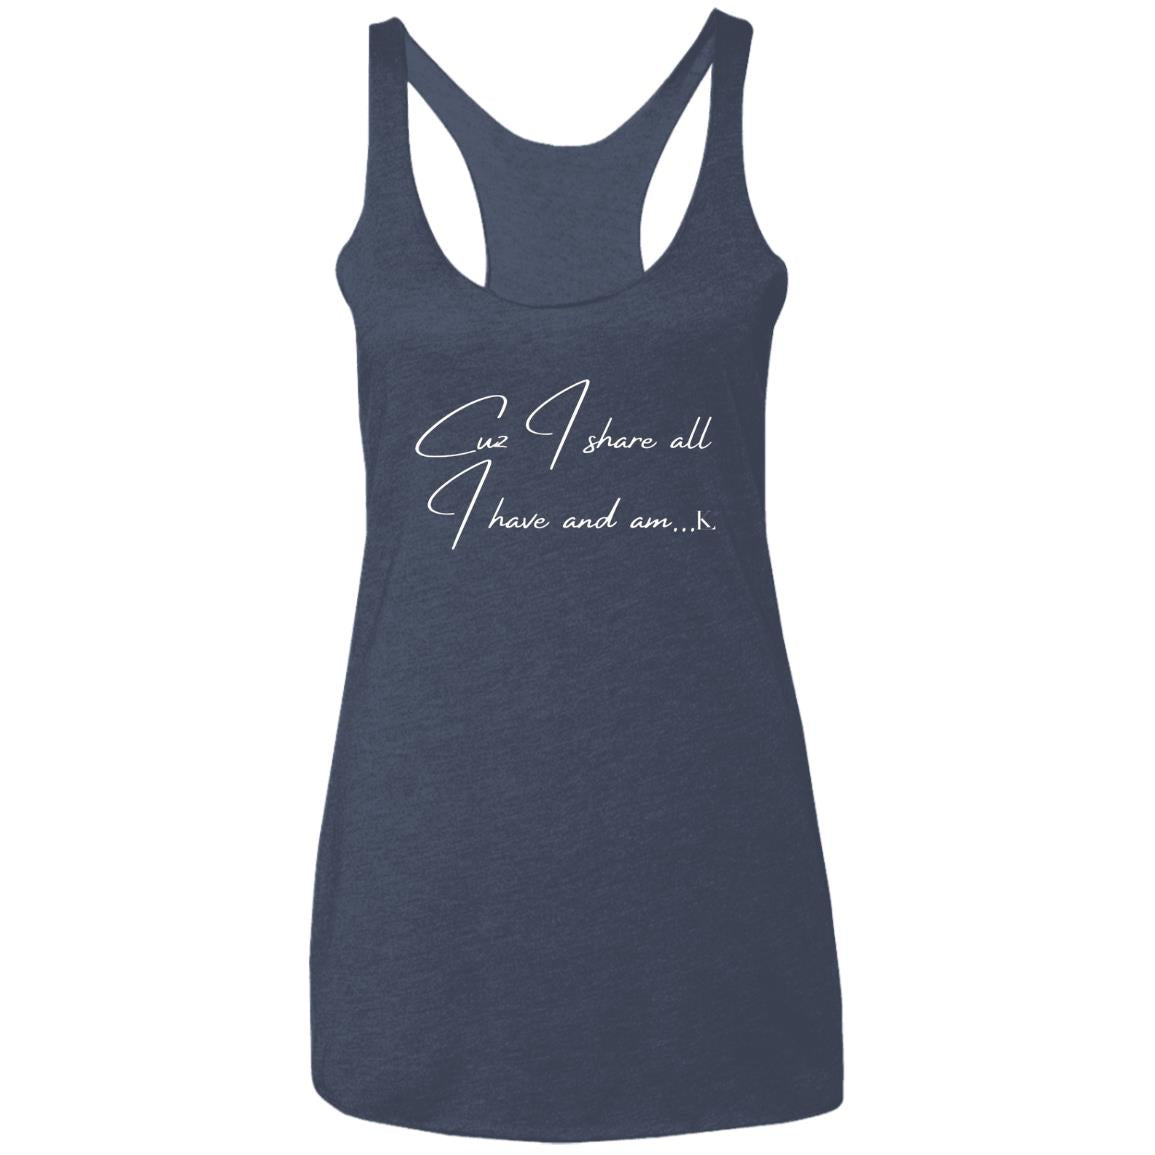 Cuz I Share All I Have And Am... Women's Racerback Tank